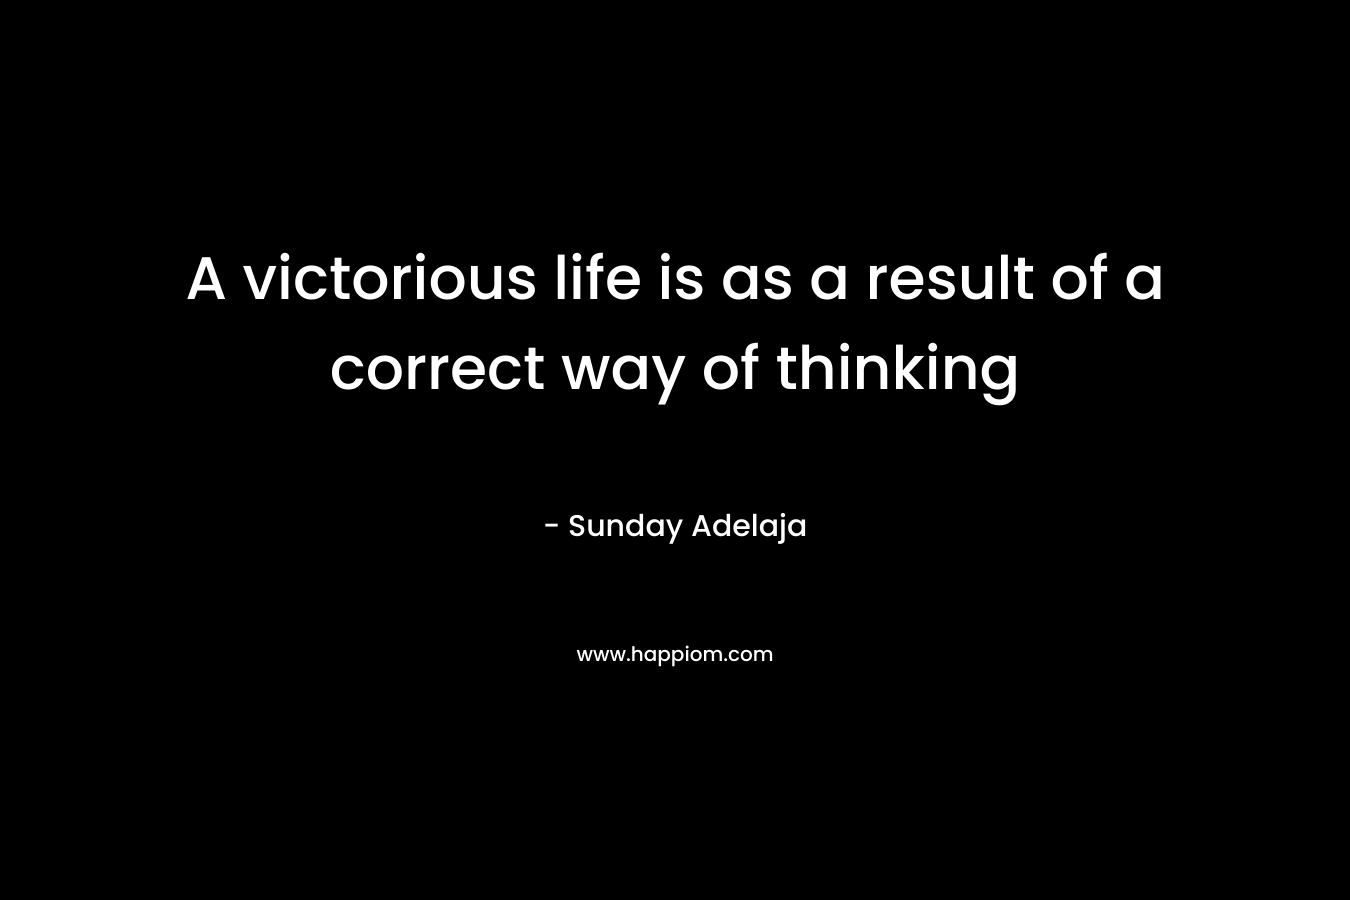 A victorious life is as a result of a correct way of thinking